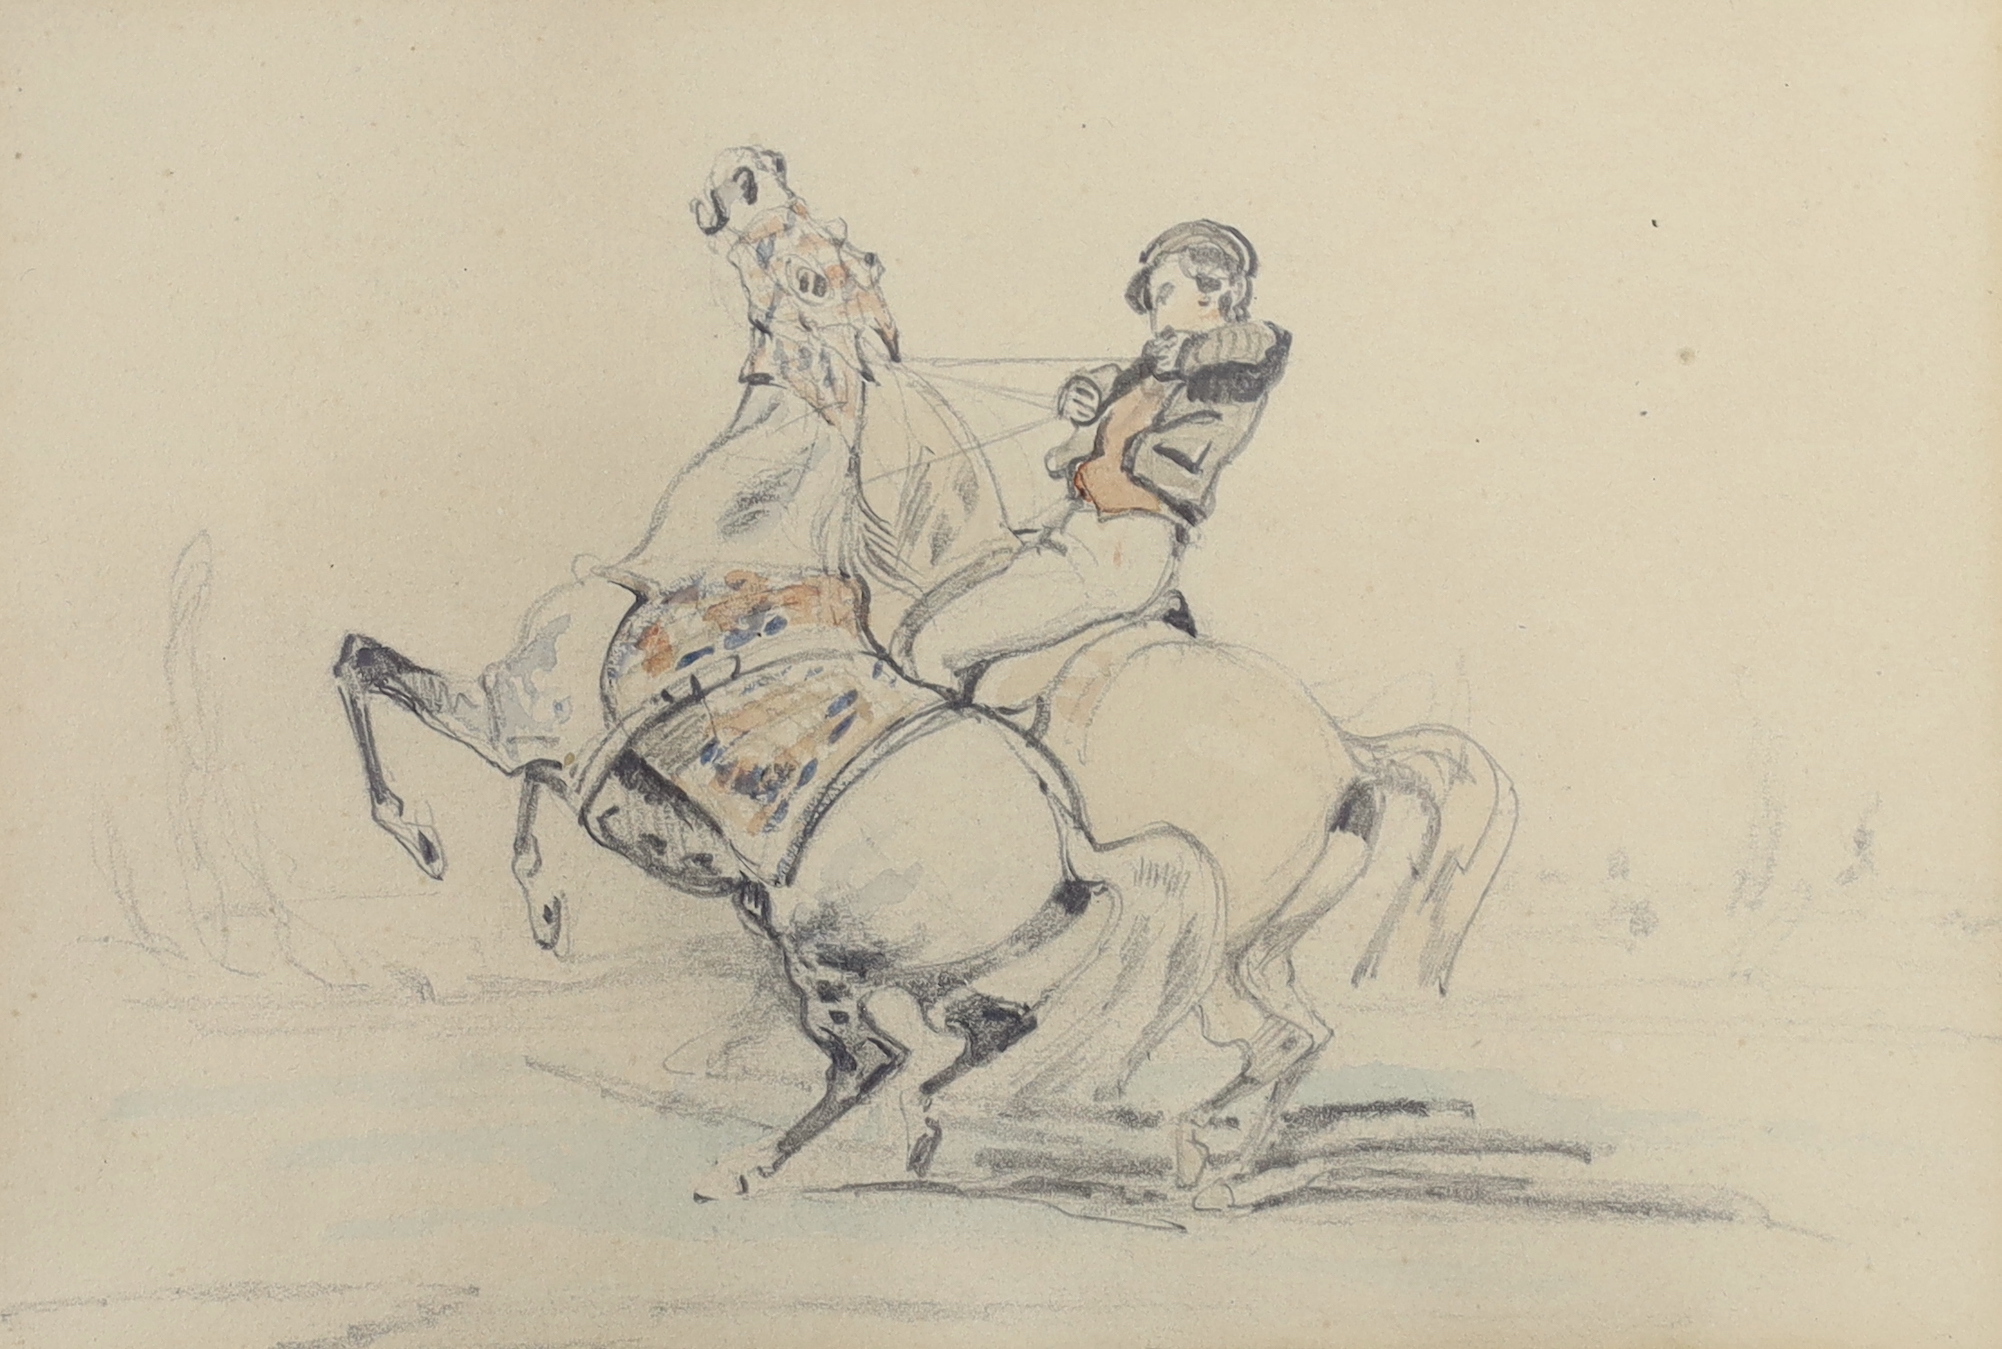 A. Jacquemont (c.1840), pencil and wash, 'Groom with two rearing horses', details verso, 15.5 x 11cm